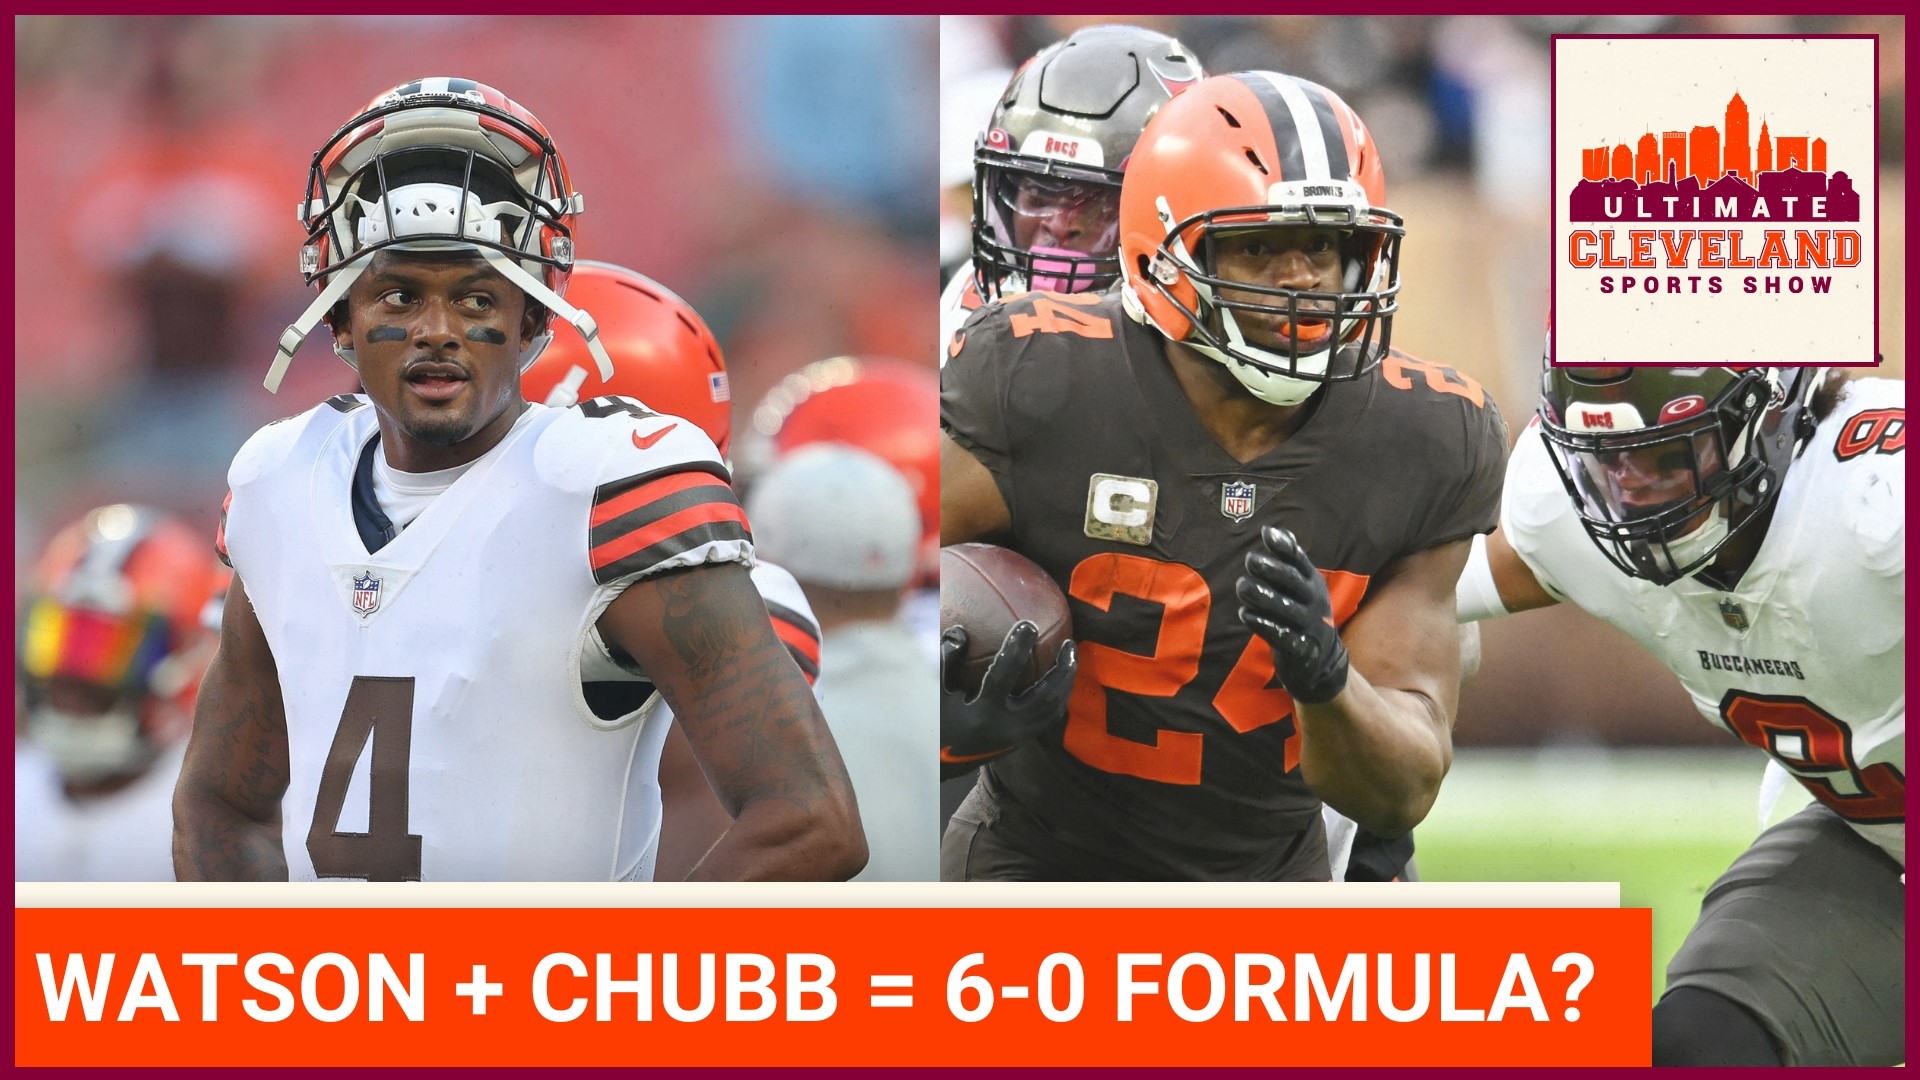 Do the Cleveland Browns have a dynamic duo in Deshaun Watson and Nick Chubb?